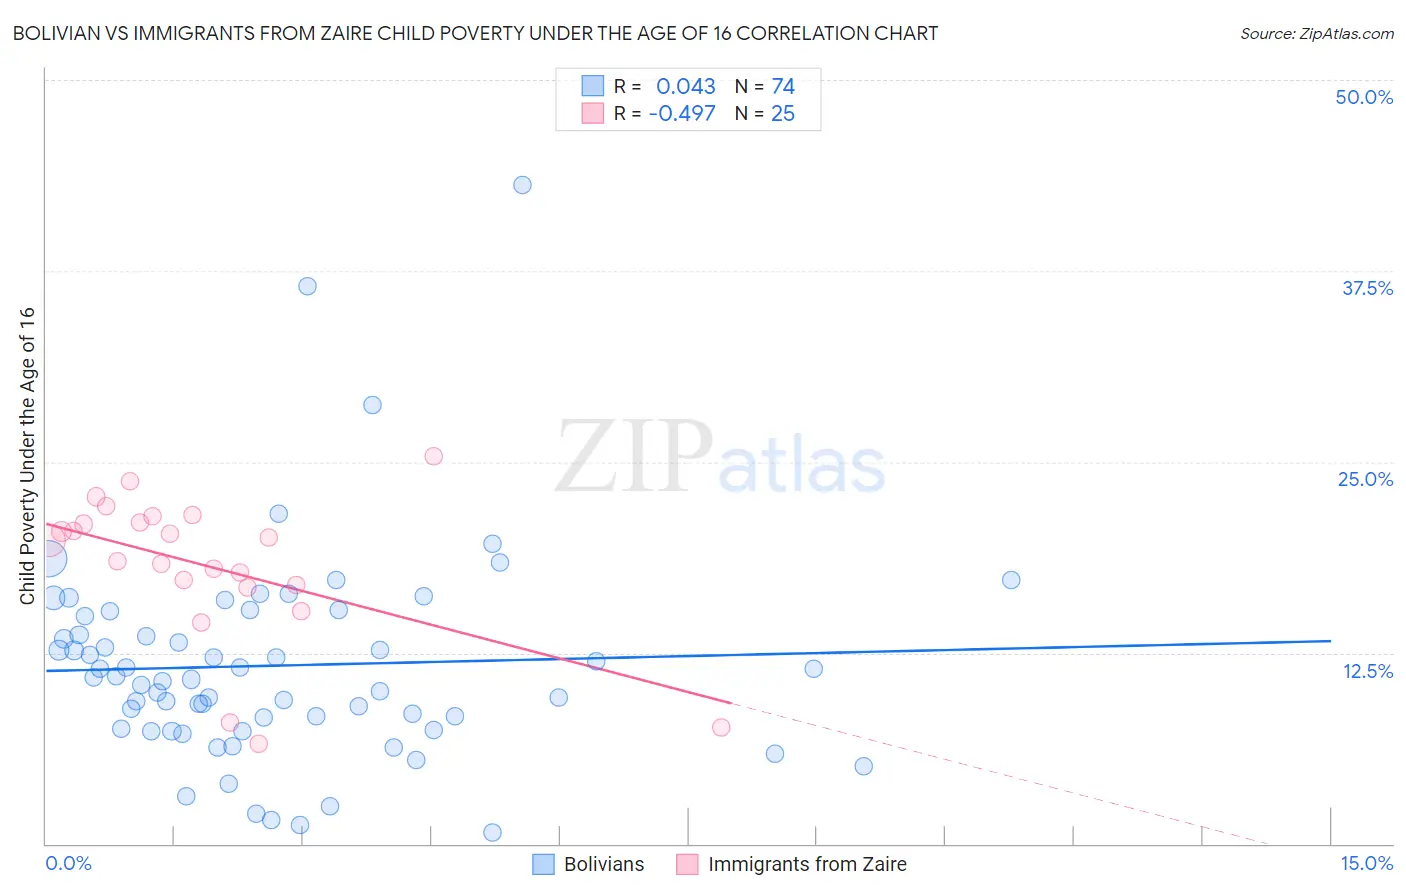 Bolivian vs Immigrants from Zaire Child Poverty Under the Age of 16